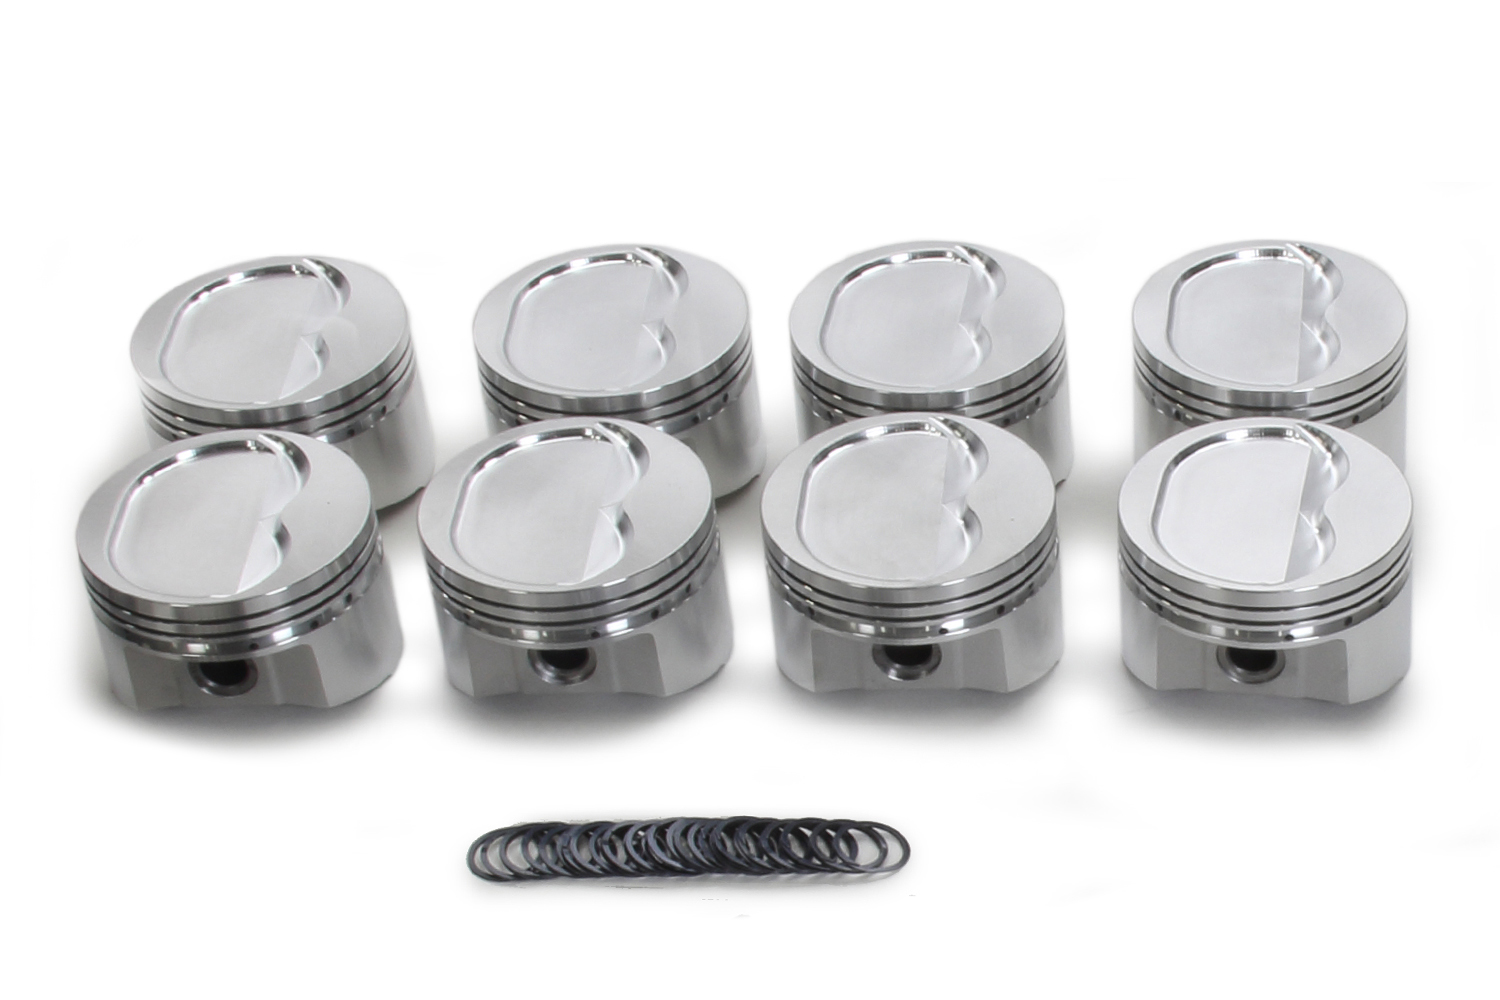 SRP Pistons 139628 Piston, 350 Inverted Dome, Forged, 4.030 in Bore, 1/16 x 1/16 x 3/16 in Ring Grooves, Minus 16.00 cc, Small Block Chevy, Set of 8